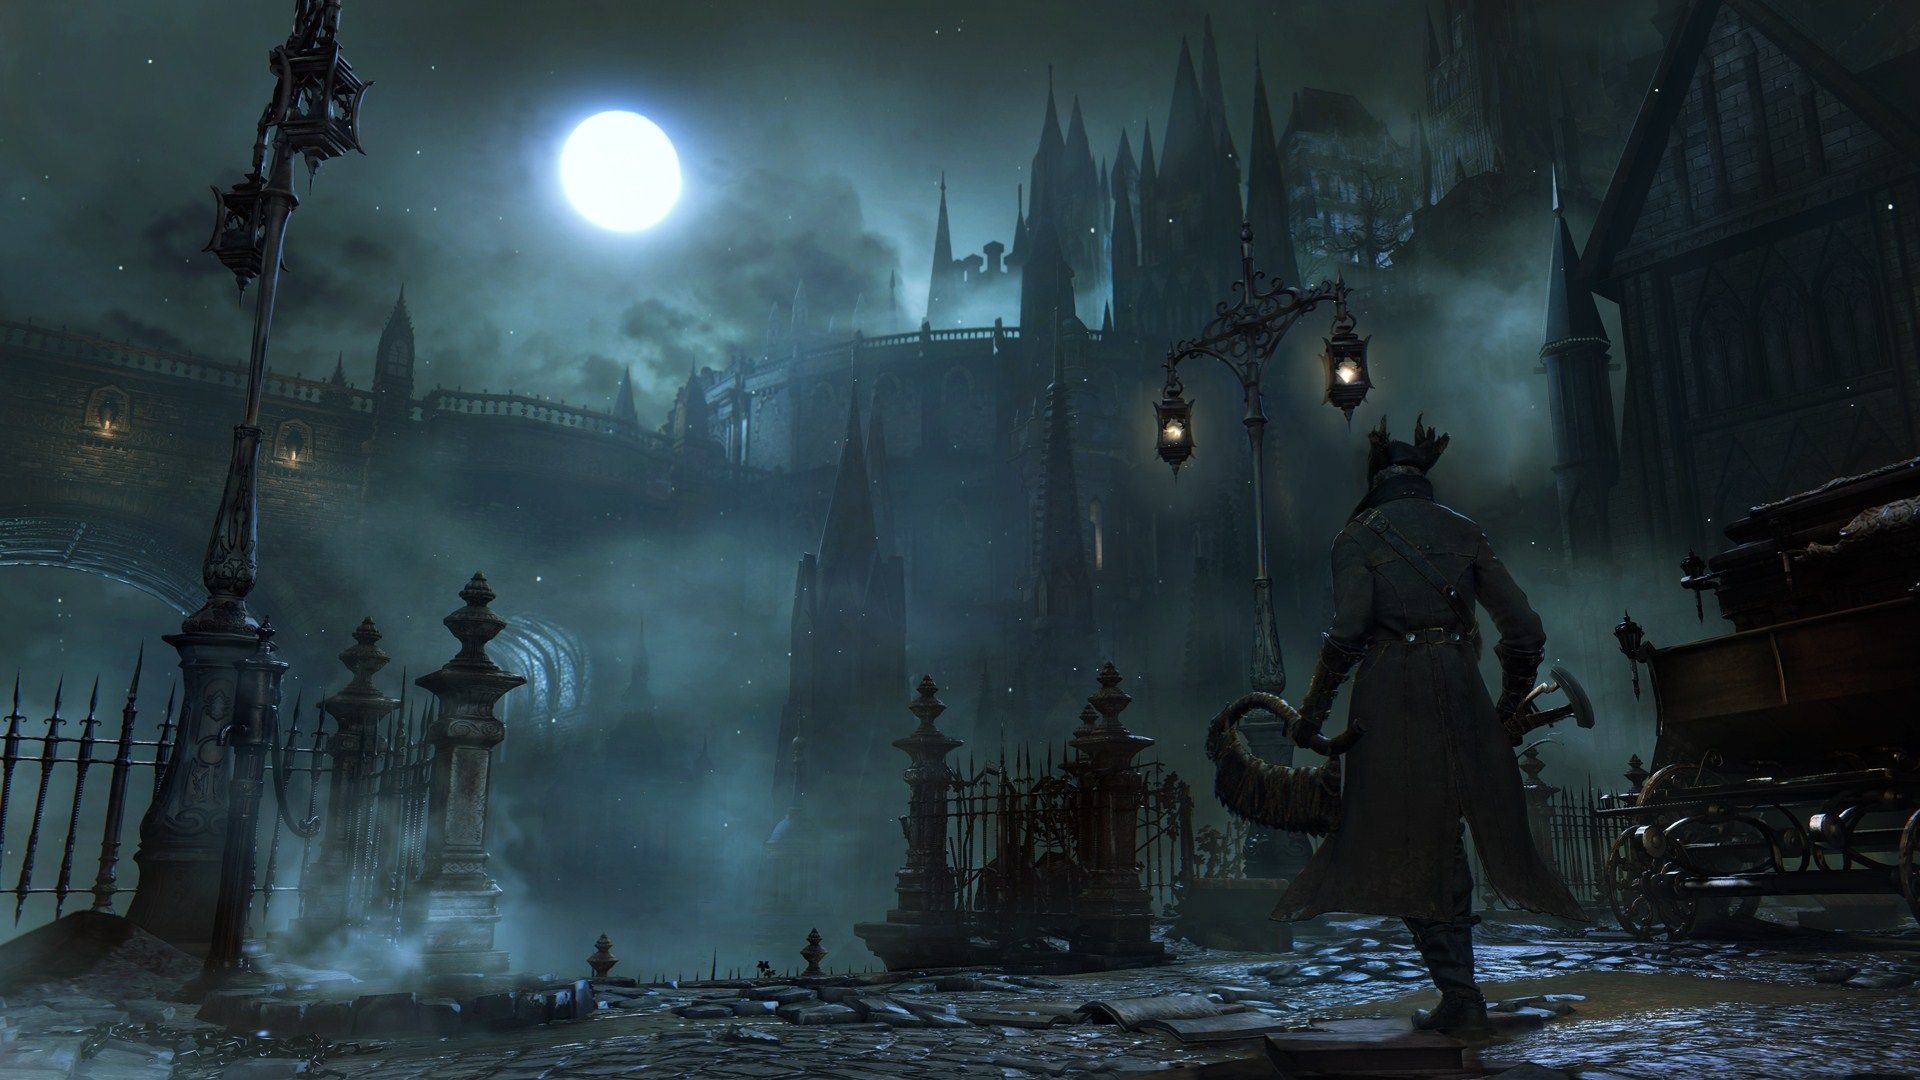 Credible insiders claim there was an official Bloodborne remaster in the works. Image credit: FromSoftware